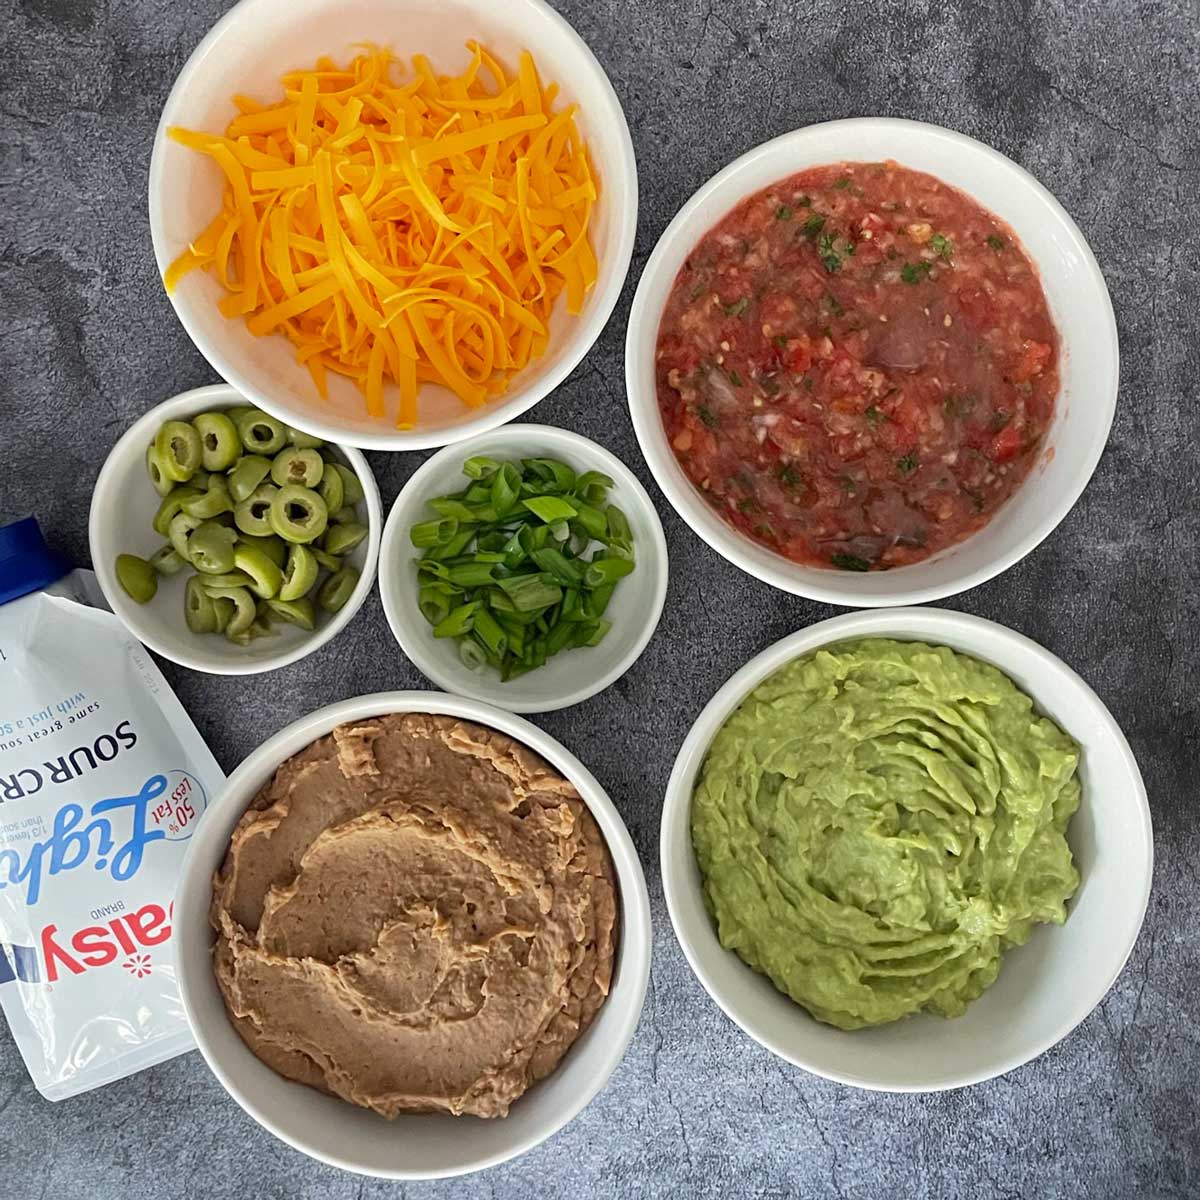 Ingredients for 7-layer dip.